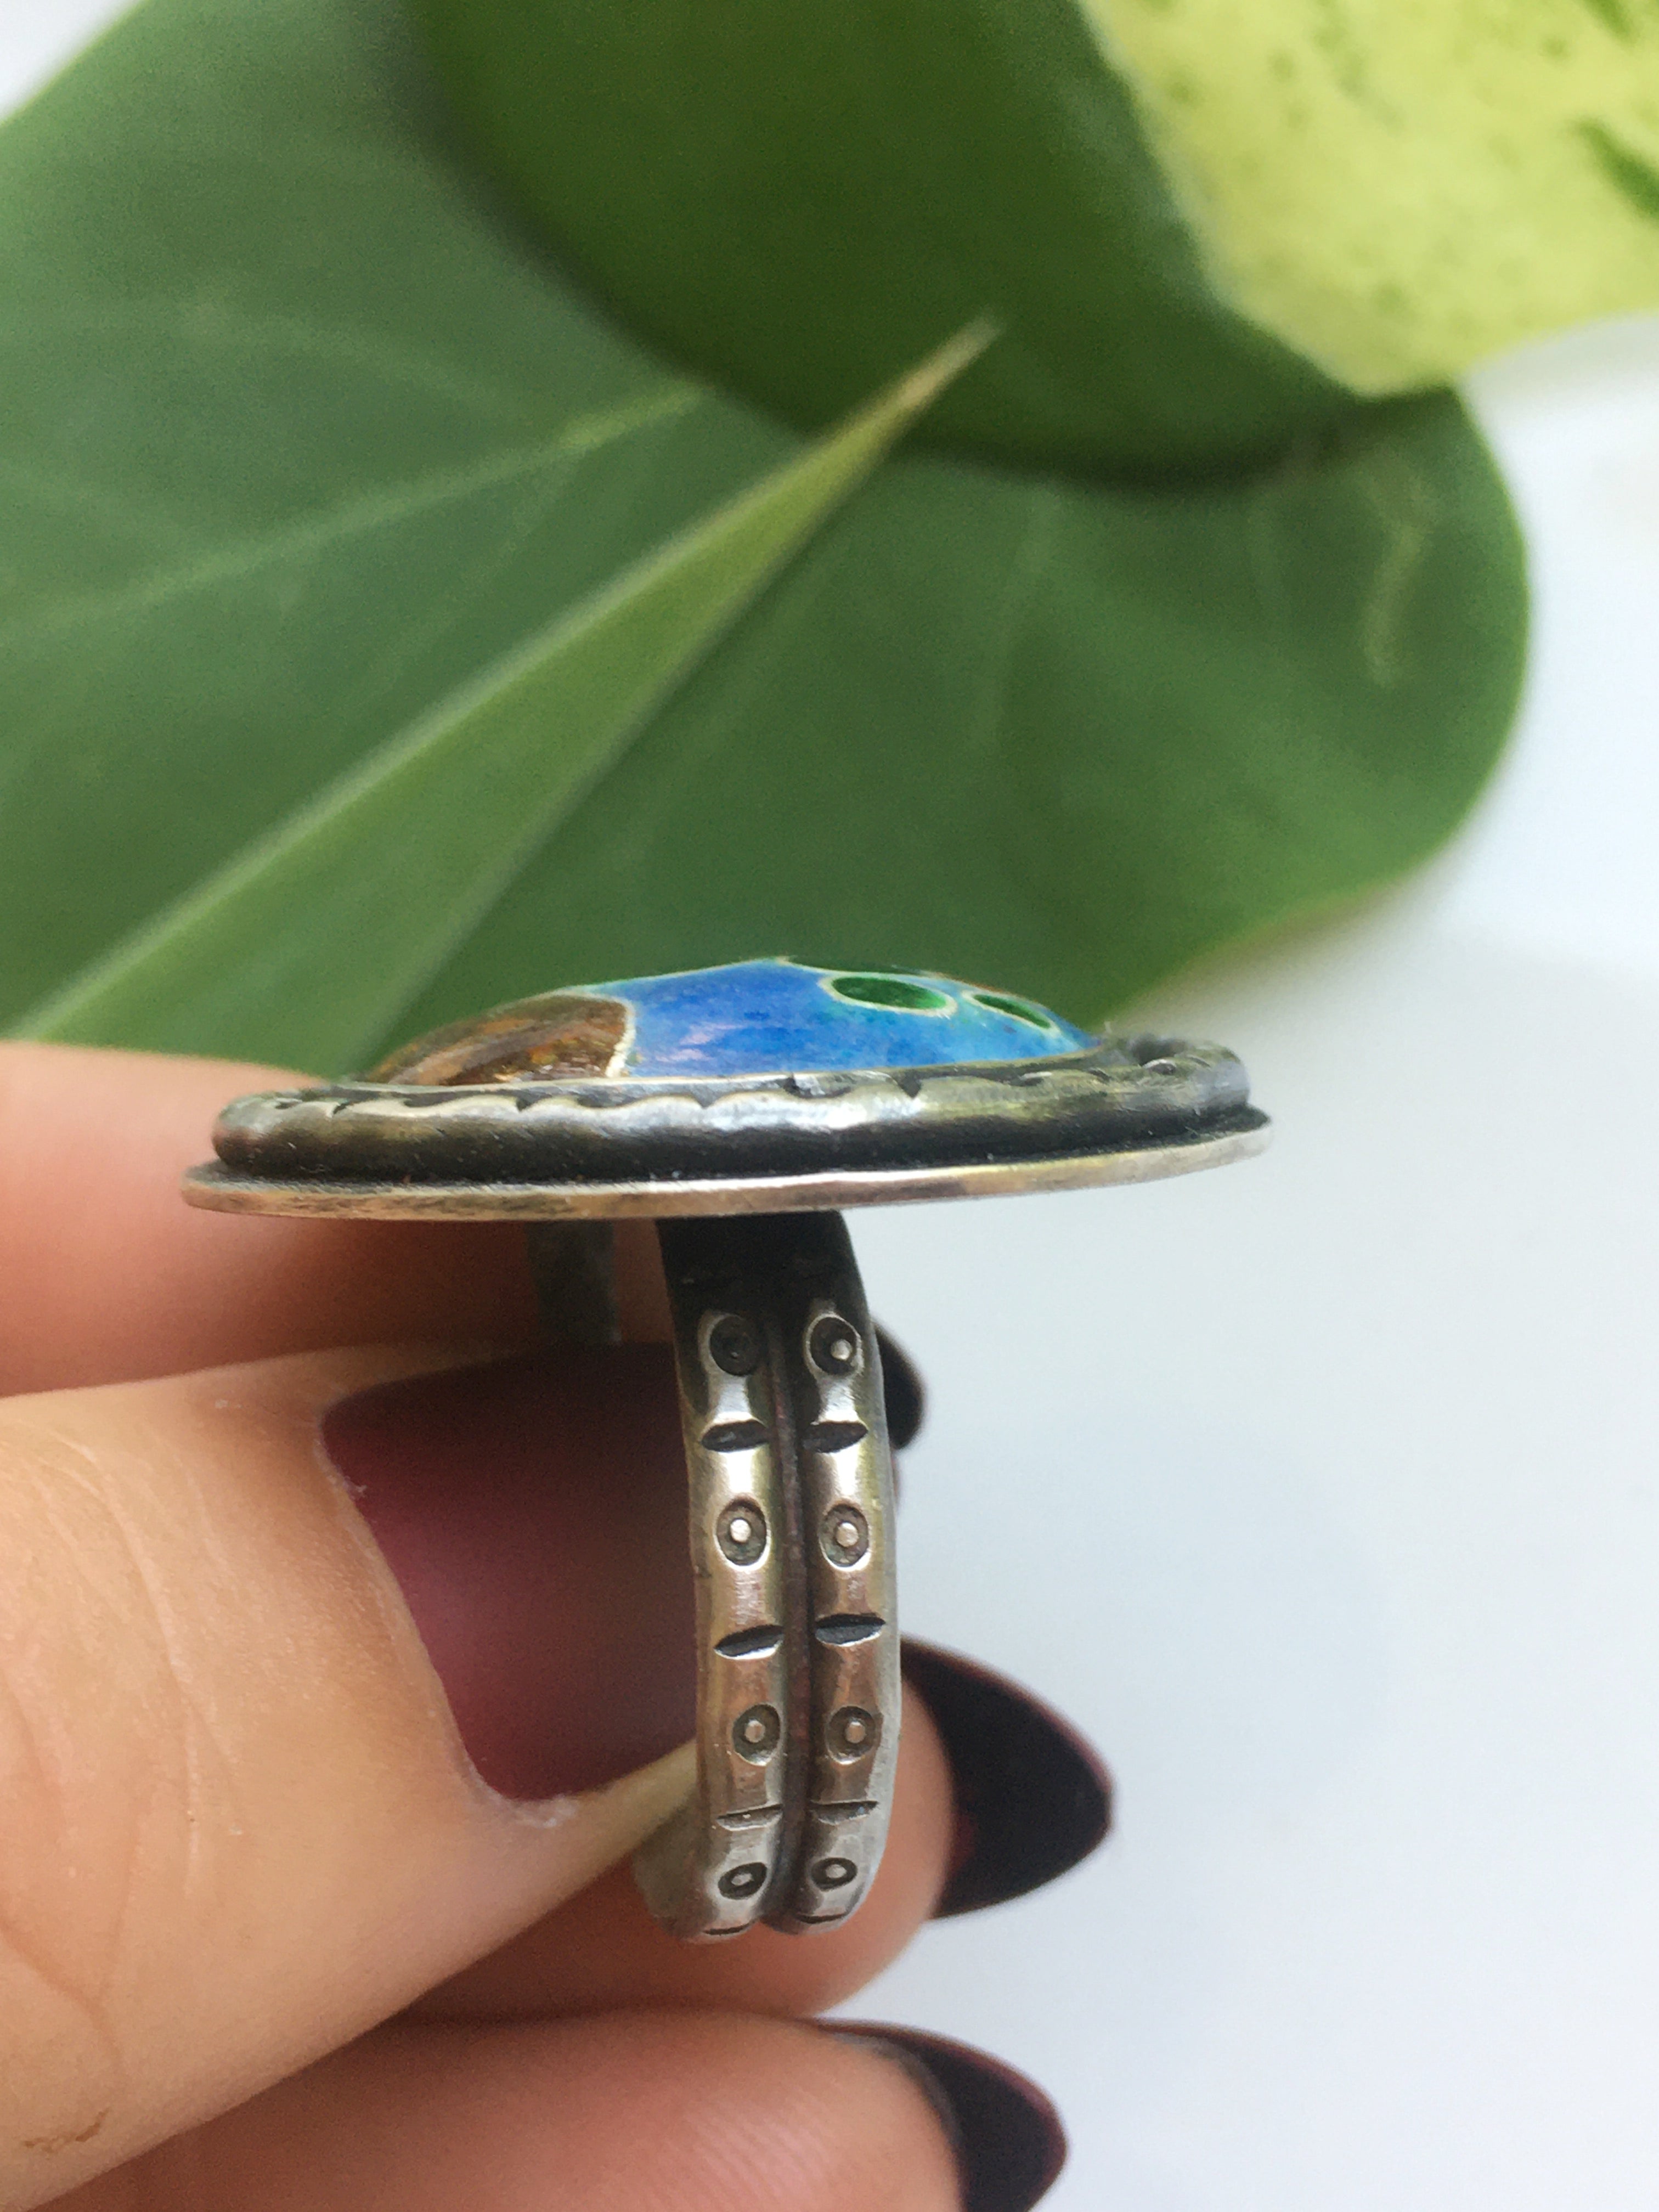 Prickly Pear Cactus Cloisonné Enamel Sterling Silver Ring-Size 8